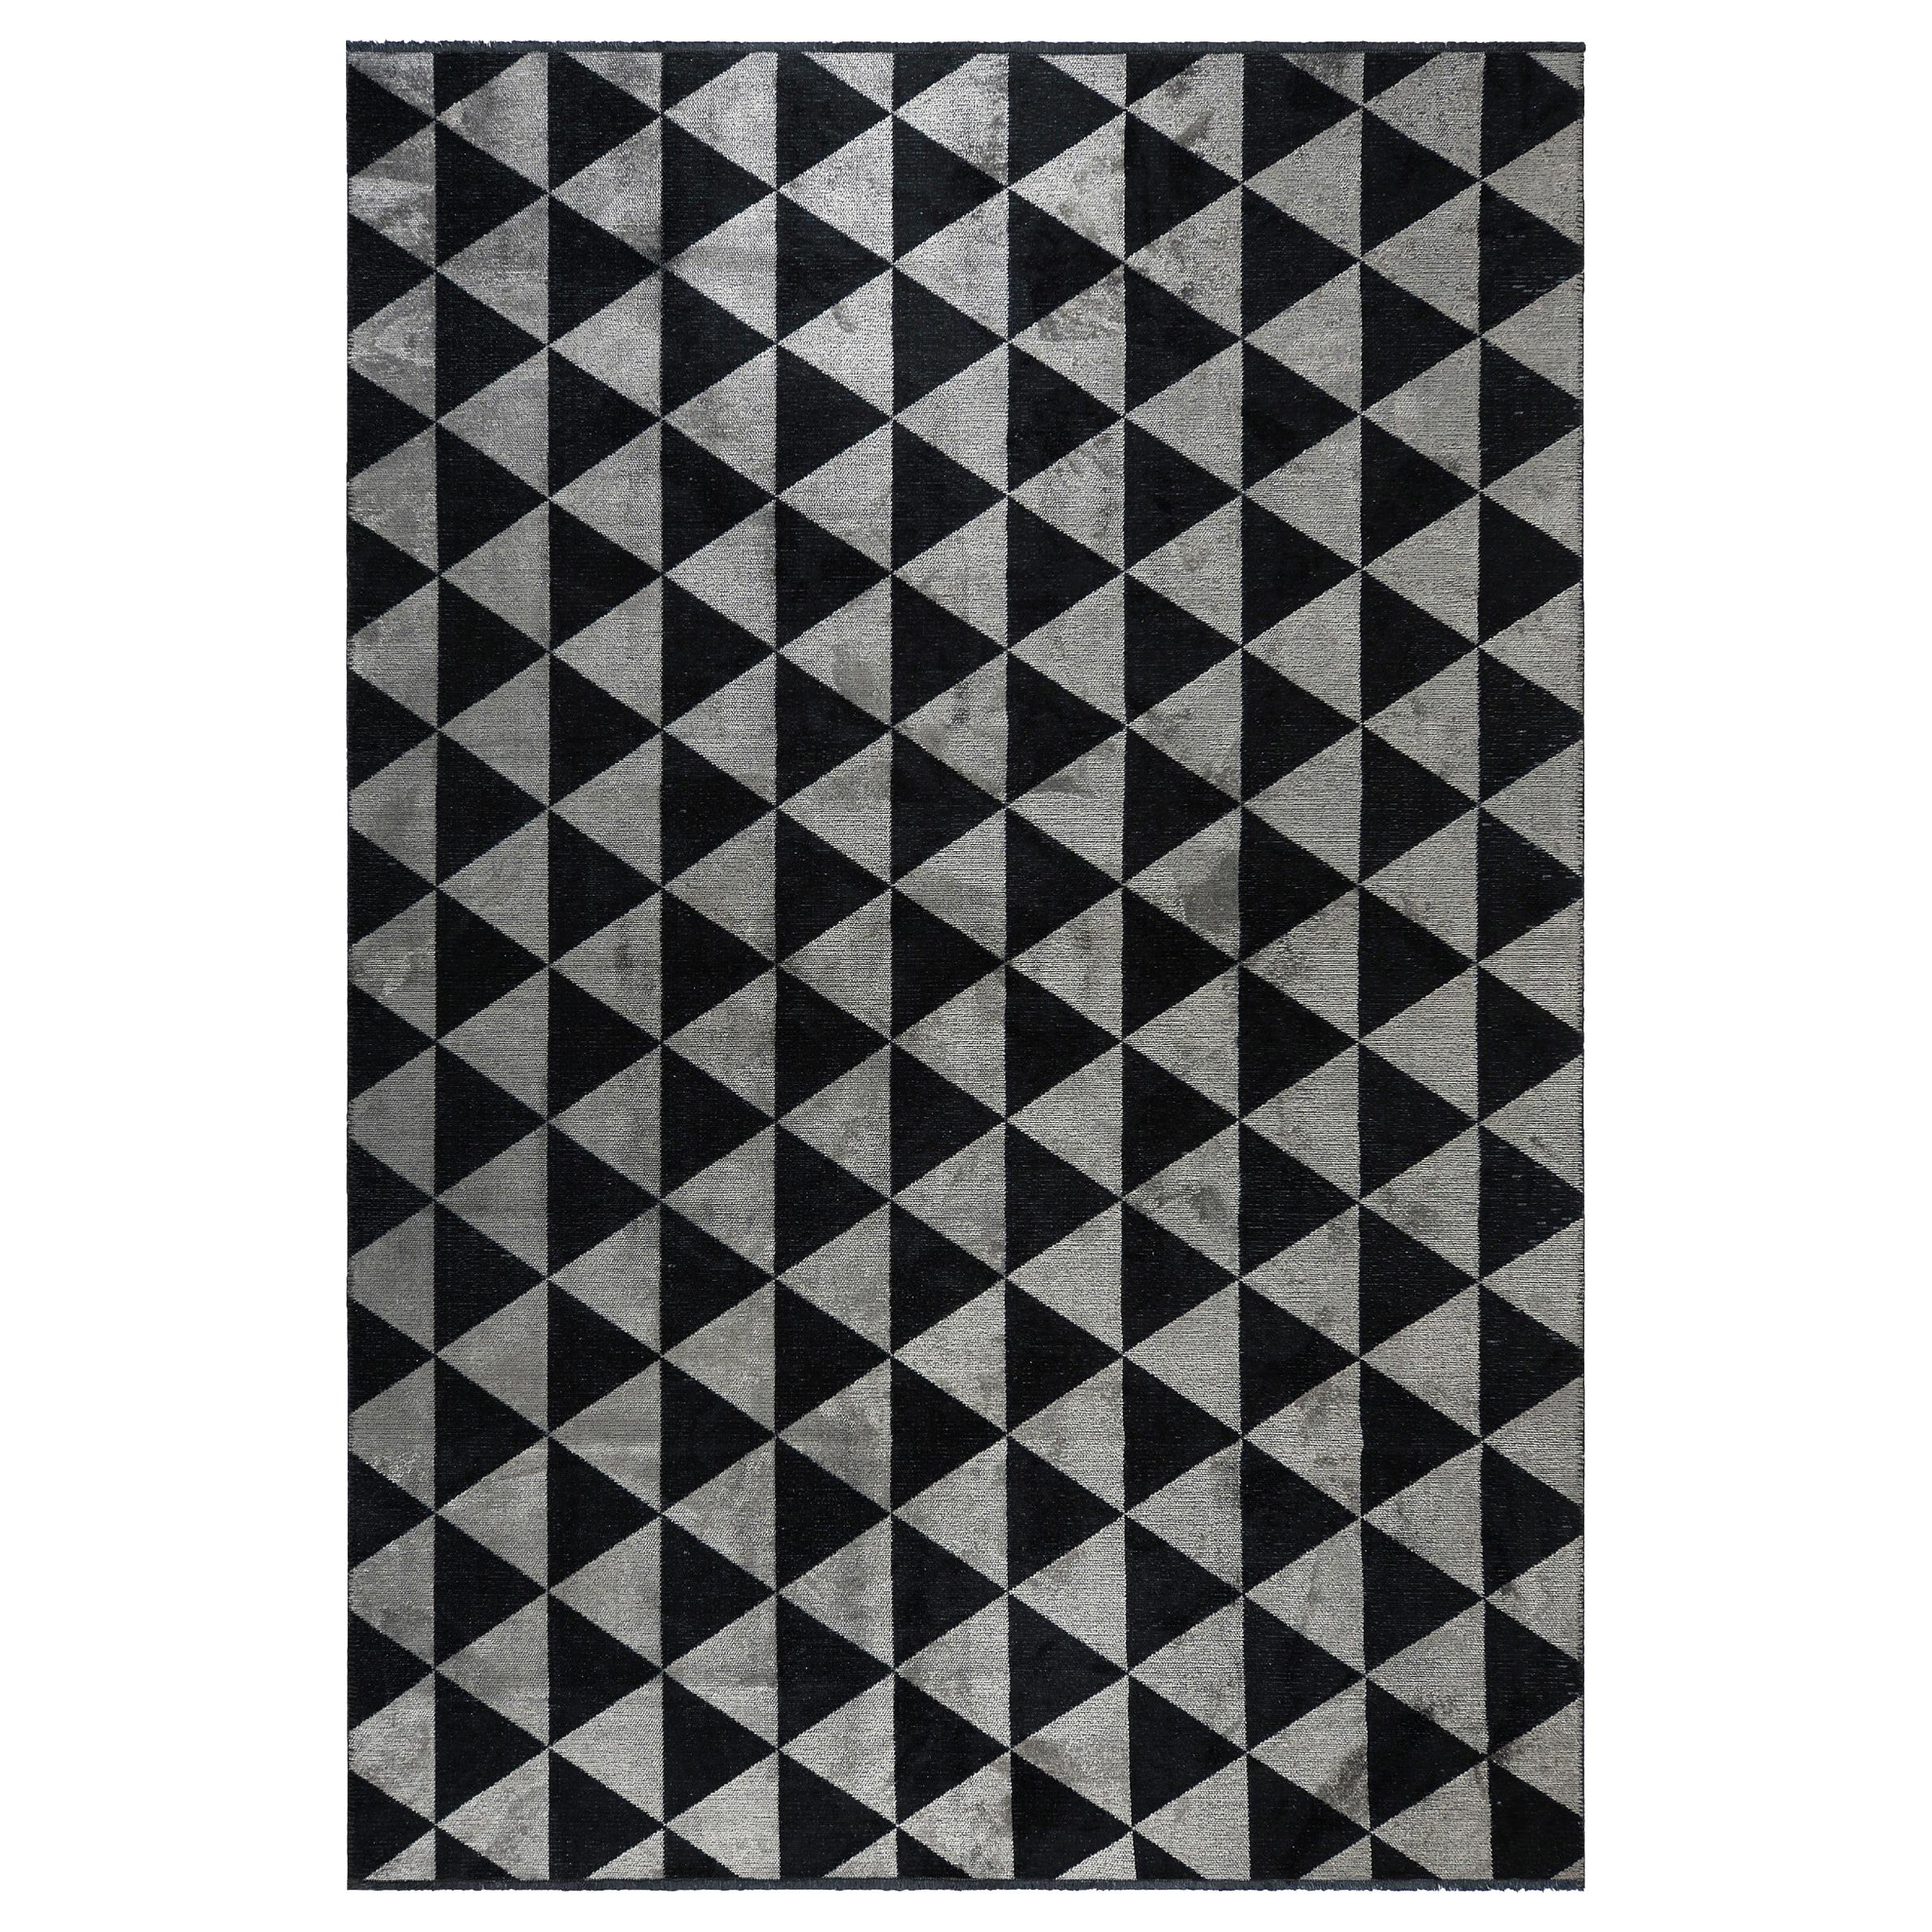 Silver Gray and Black Triangle Diamond Geometric Pattern Rug with Shine For Sale